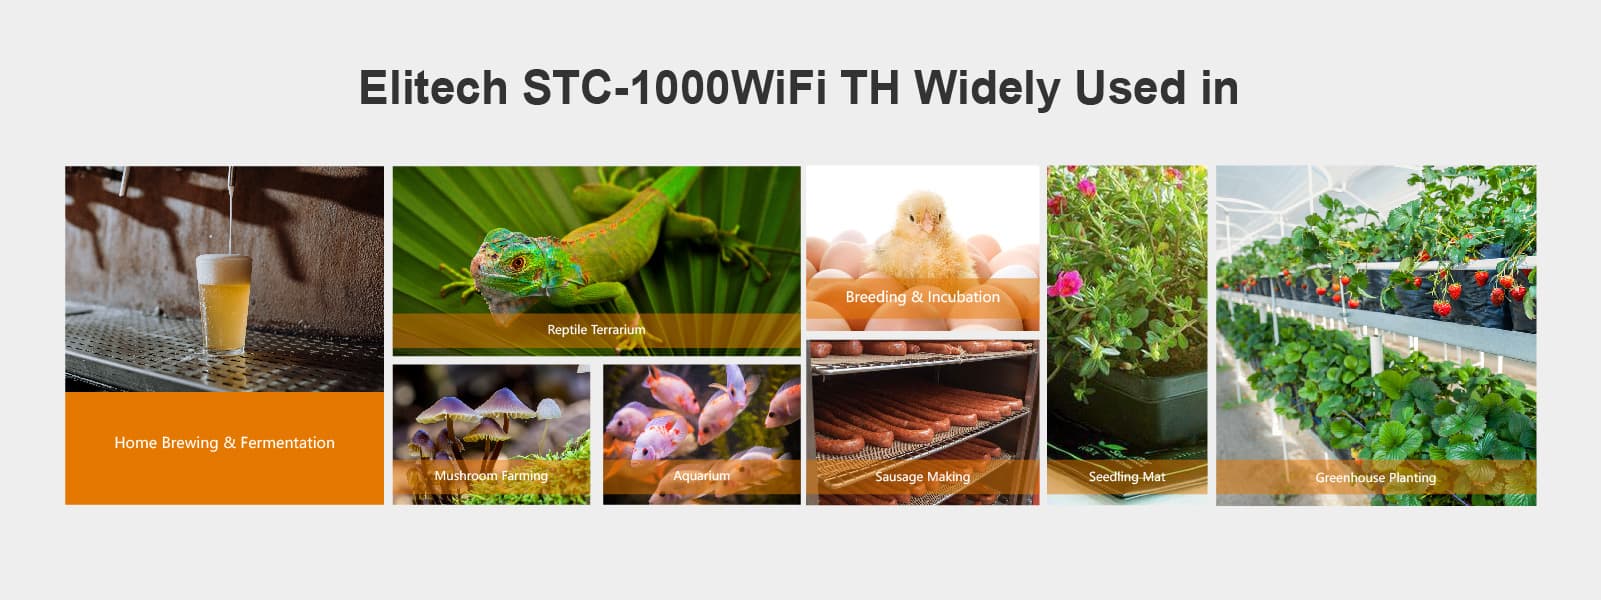 STC-1000WiFi TH Temperature and Humidity Controller Application - Elitech UK